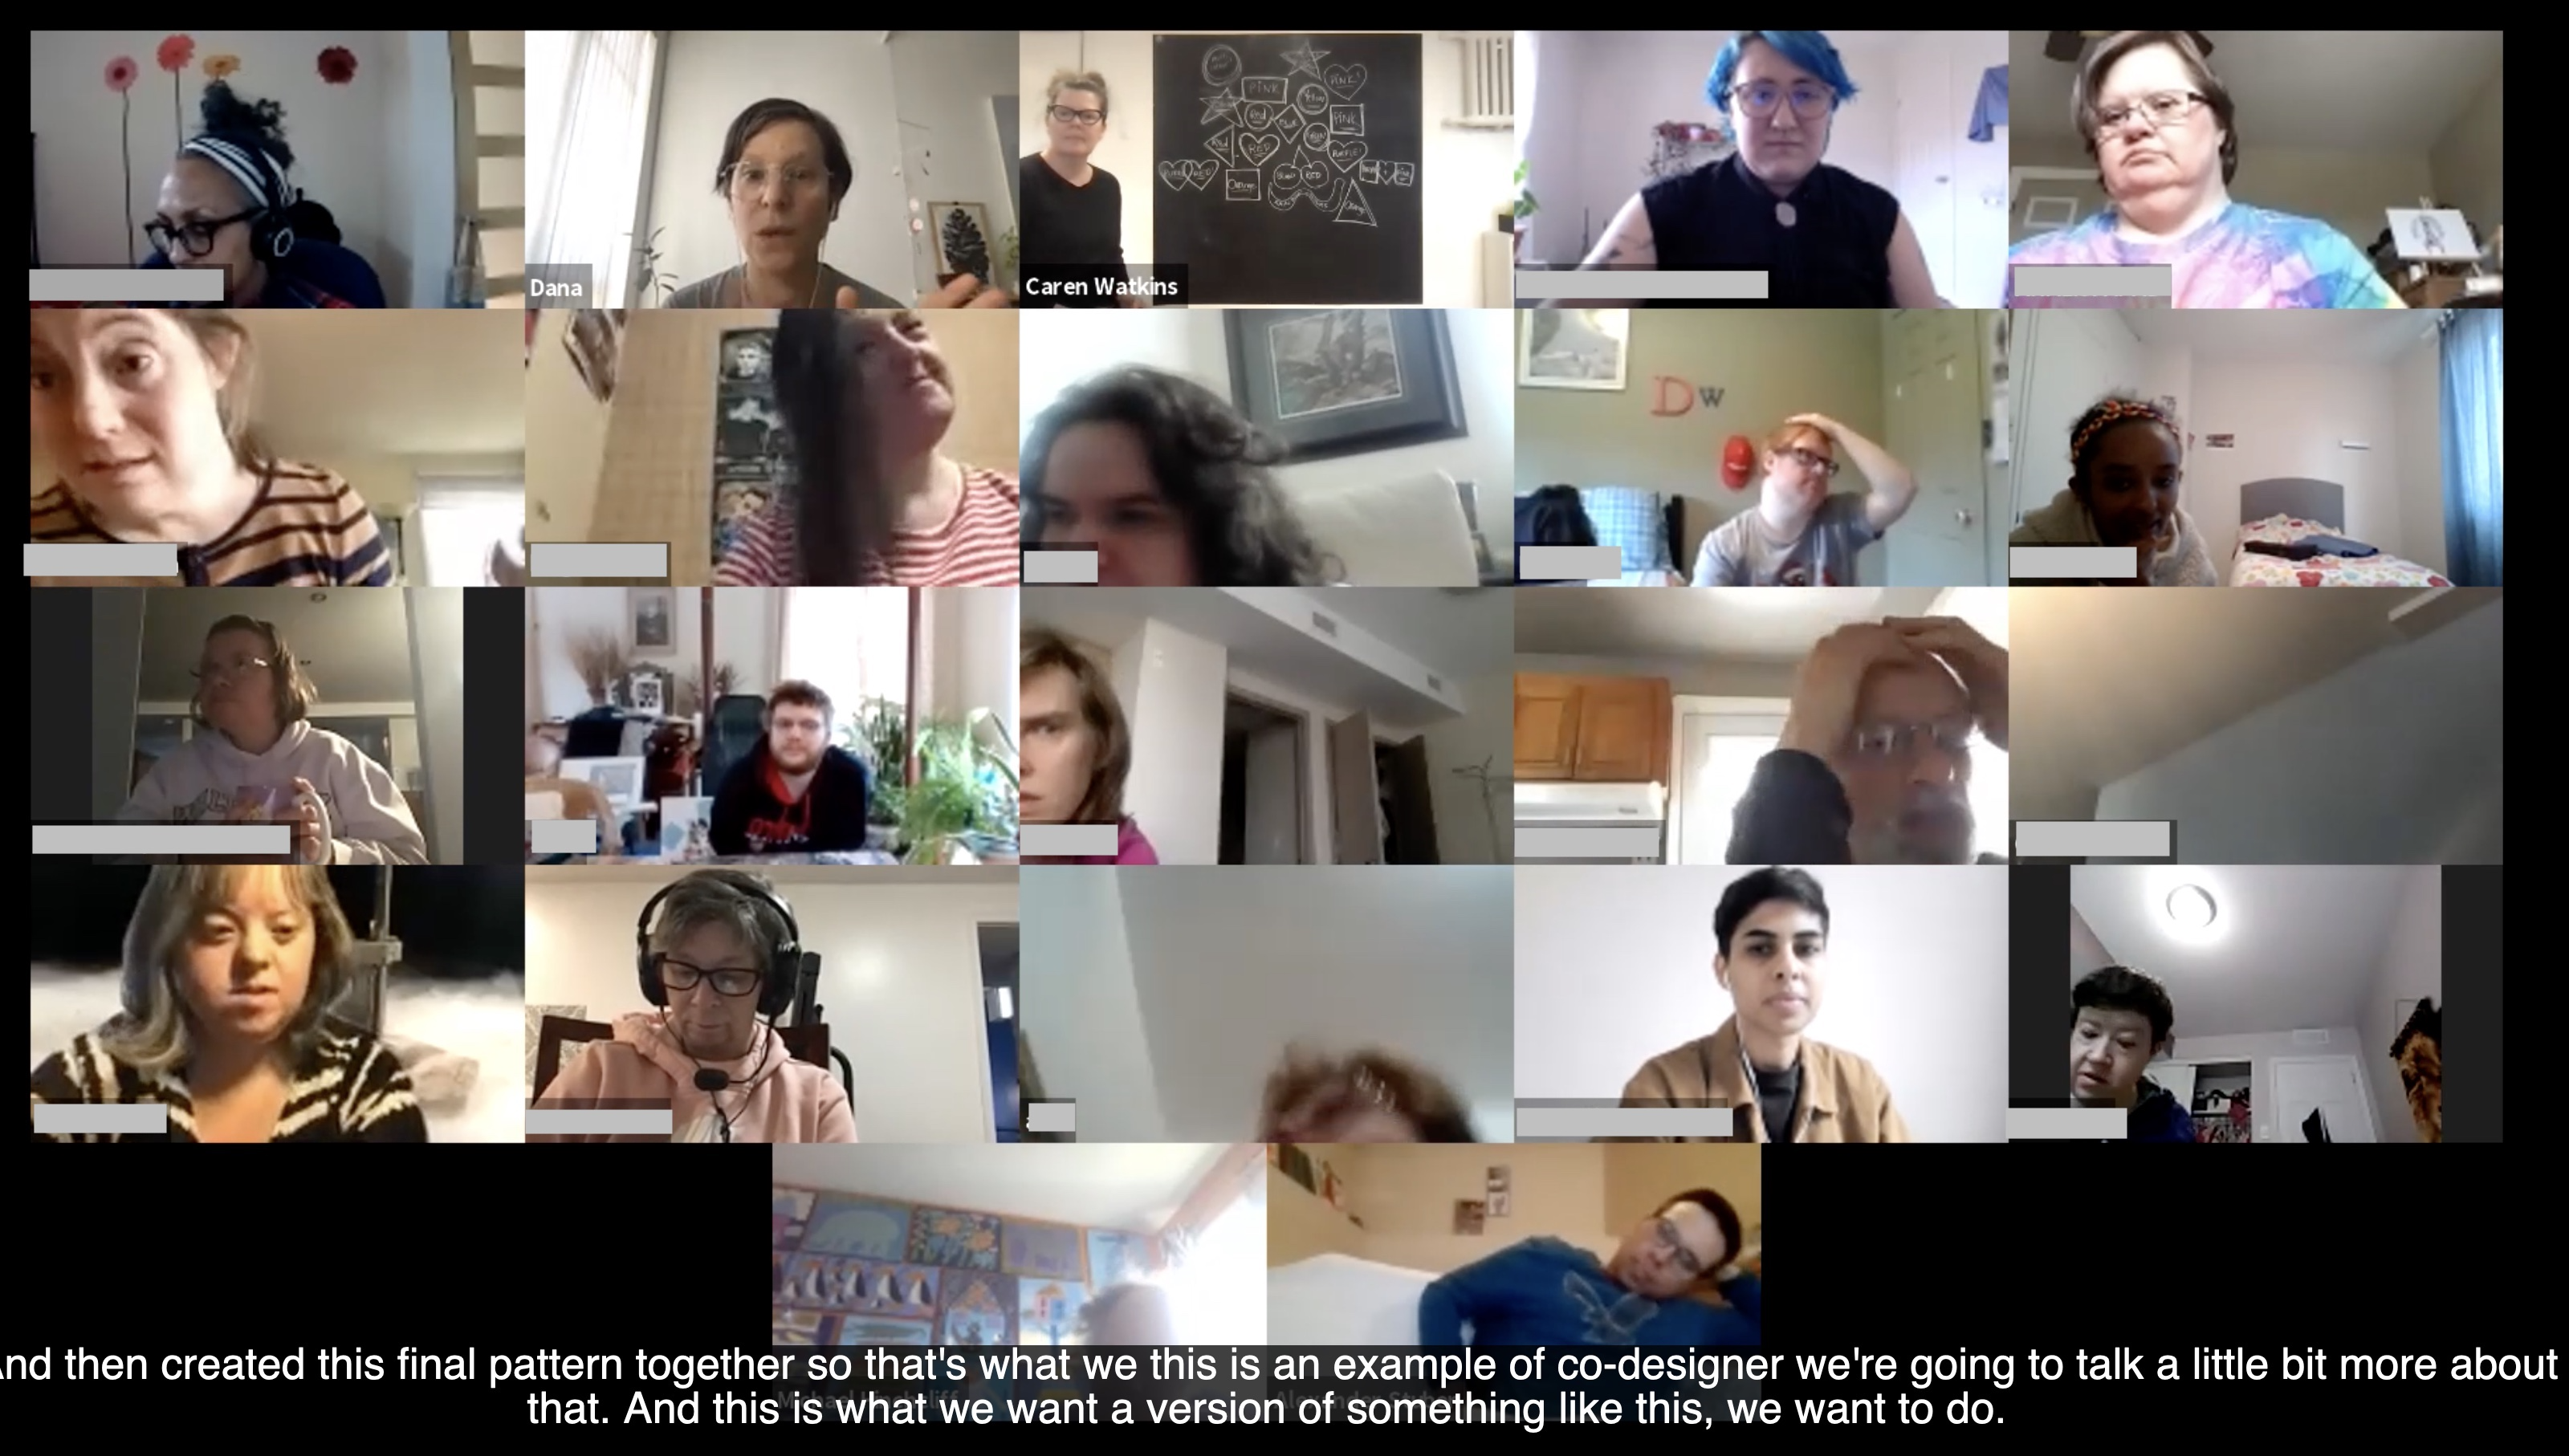 A Zoom screen capture of the Think Tank sesssion showing all participants in gallery mode.